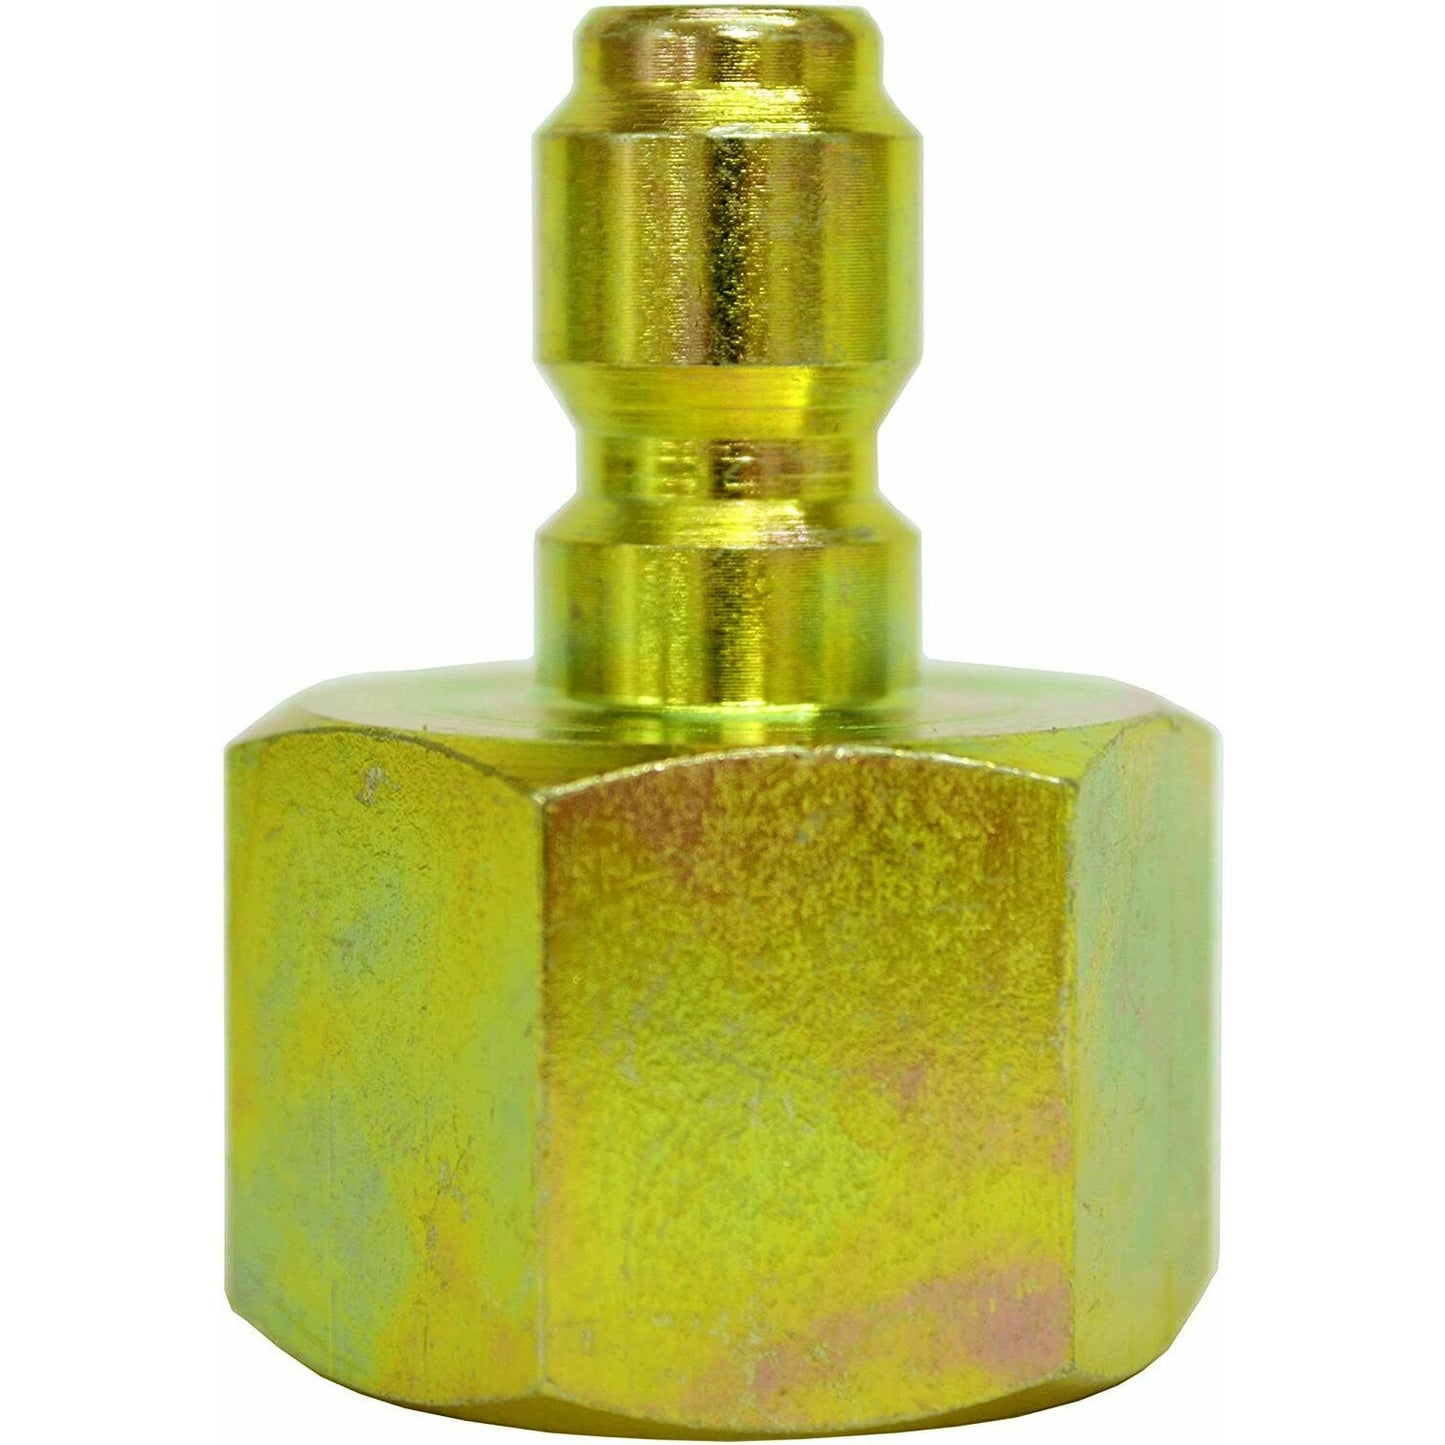 KT Industries 6-7068 Quick Coupler Plug 1/4" x M22F for Pressure Washer 5500 PSI